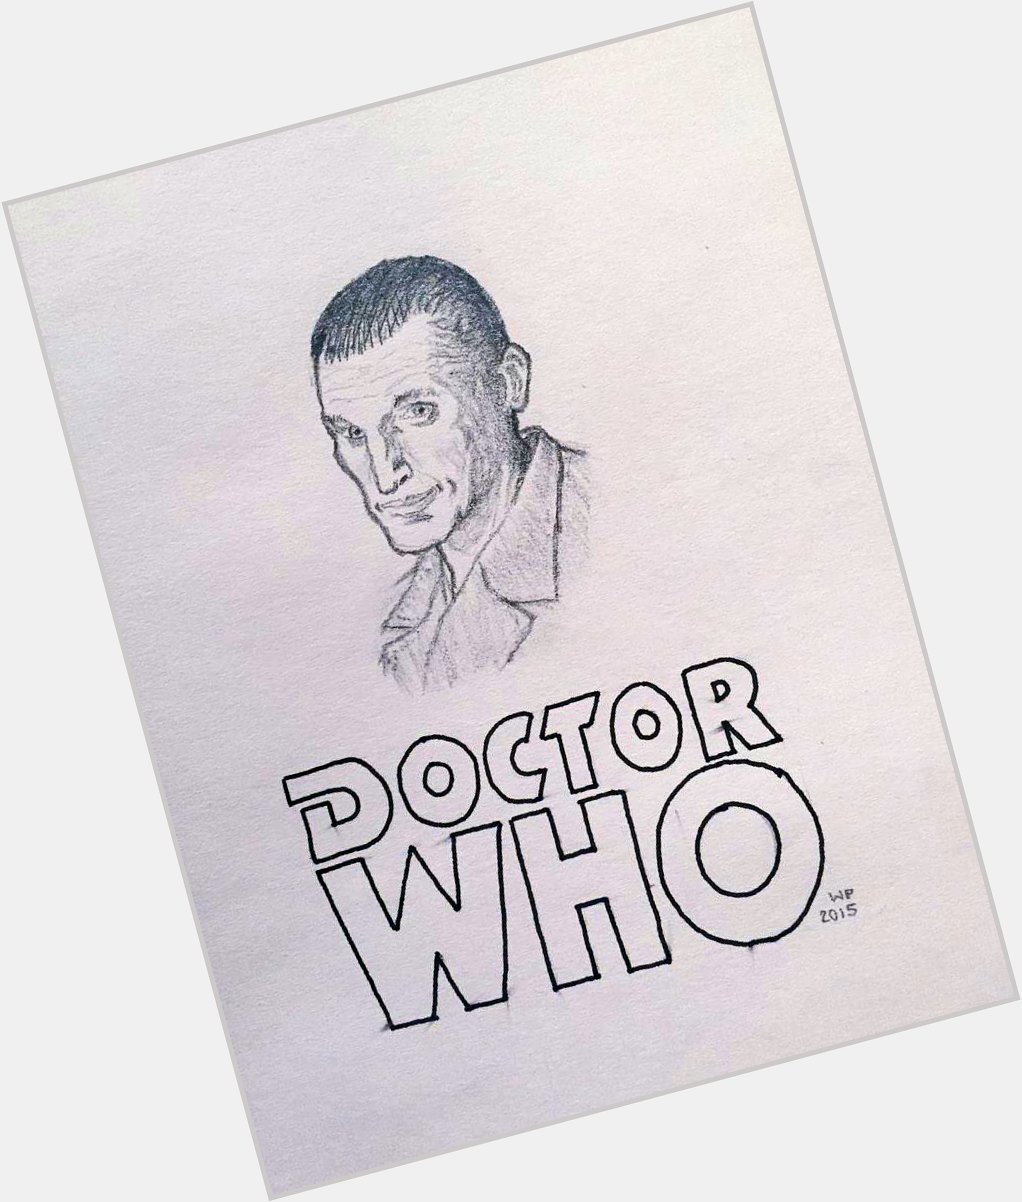 Happy birthday, Christopher Eccleston! Here s an old amateur drawing from several years ago. 